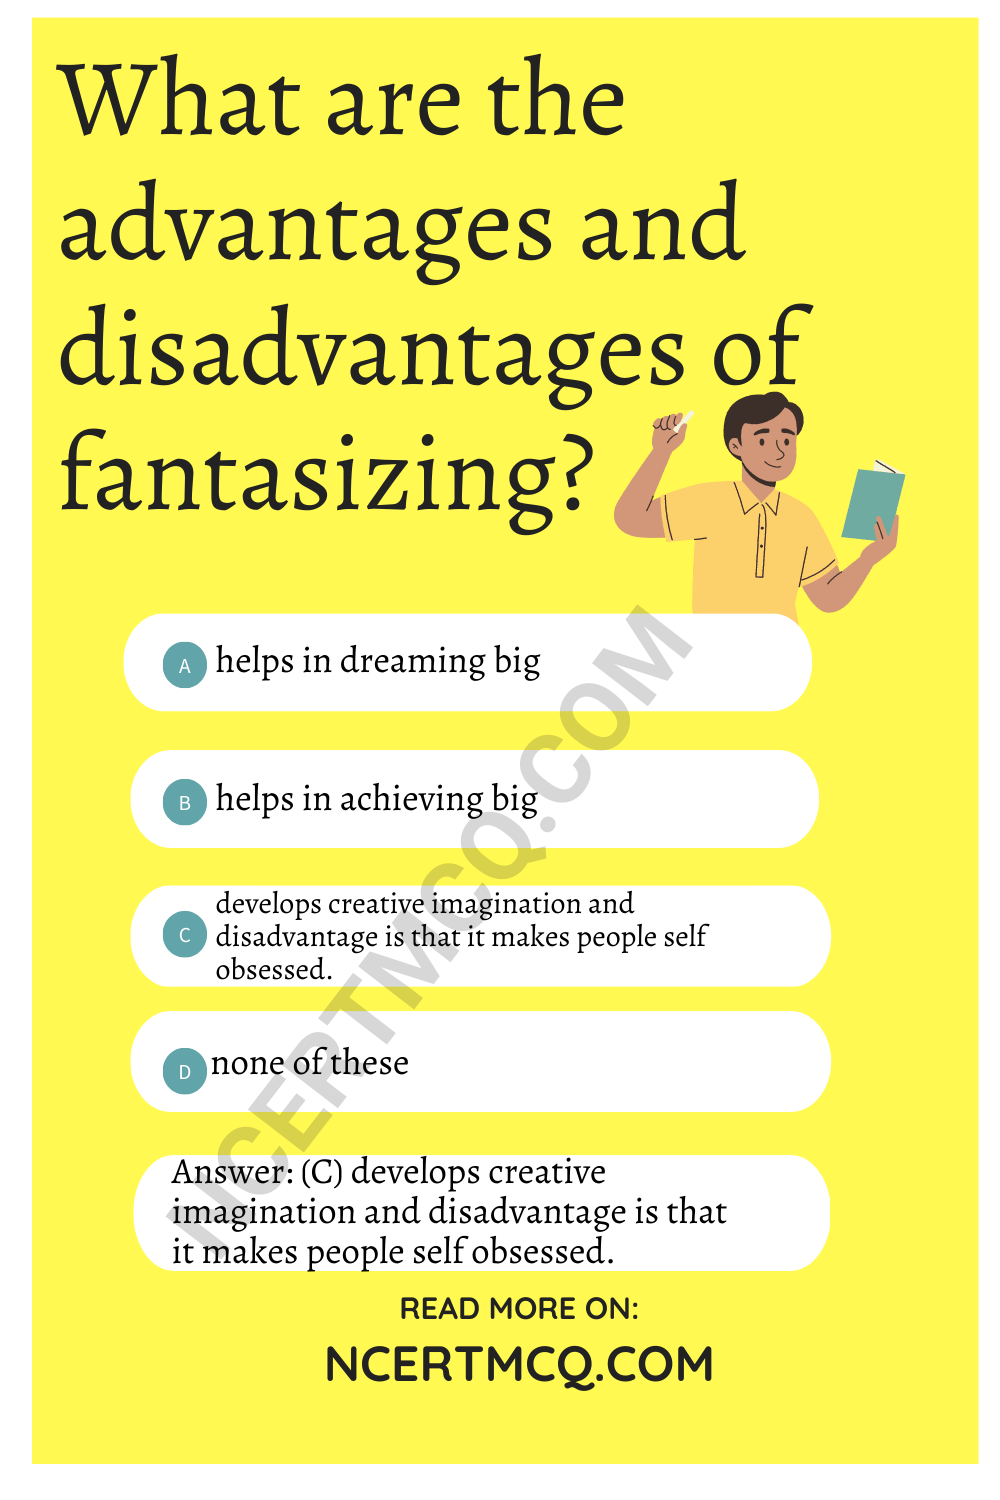 What are the advantages and disadvantages of fantasizing?